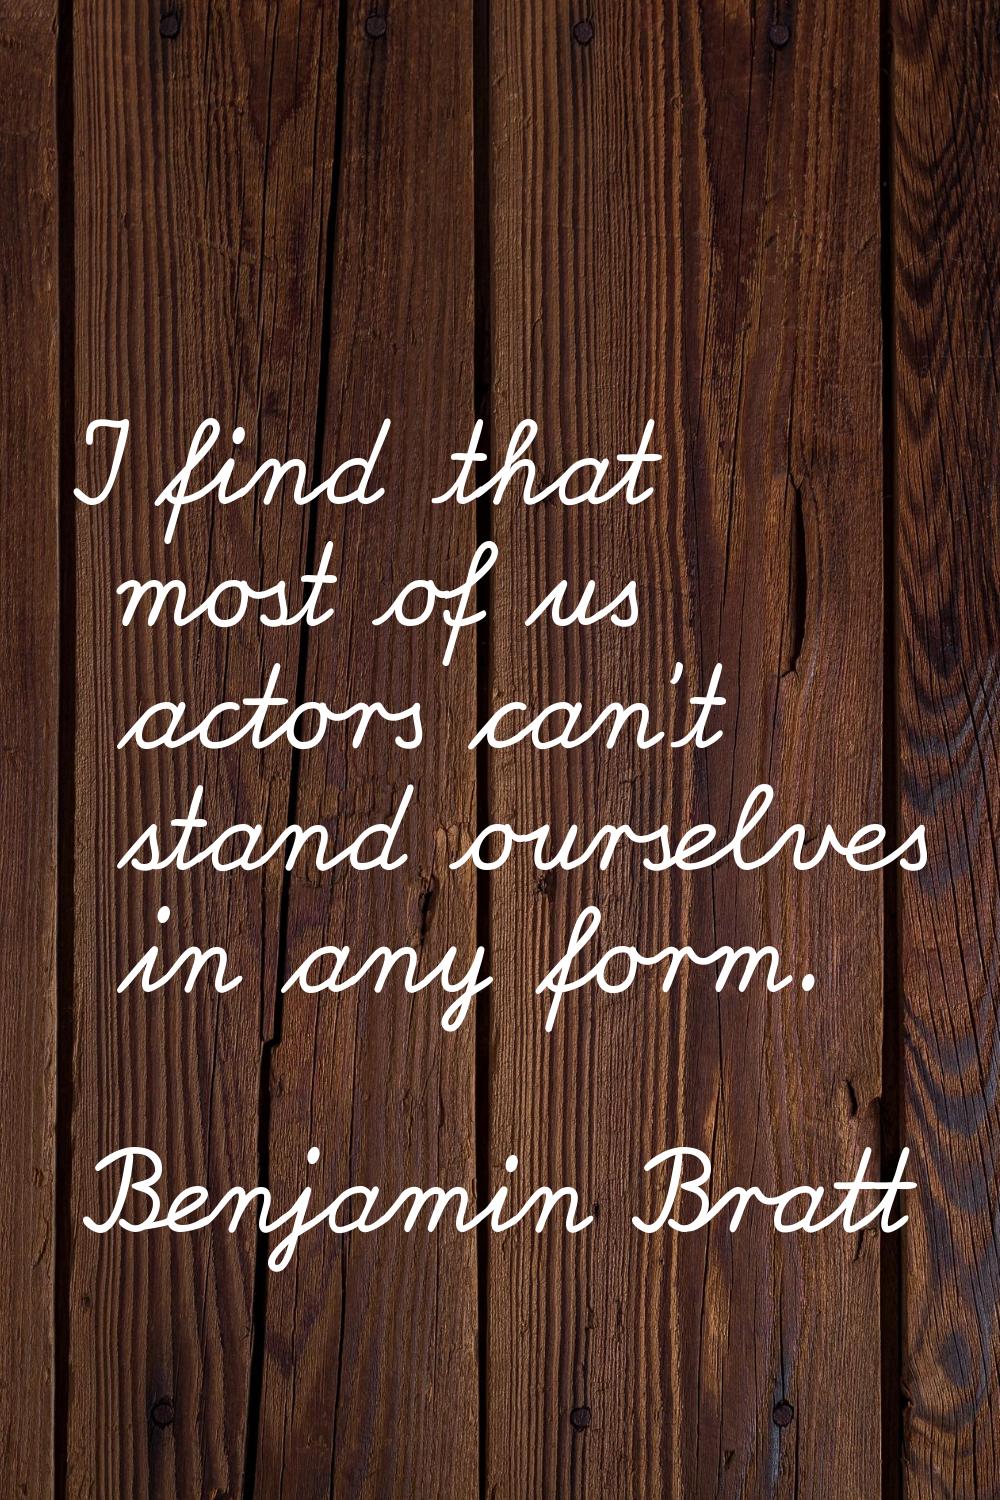 I find that most of us actors can't stand ourselves in any form.